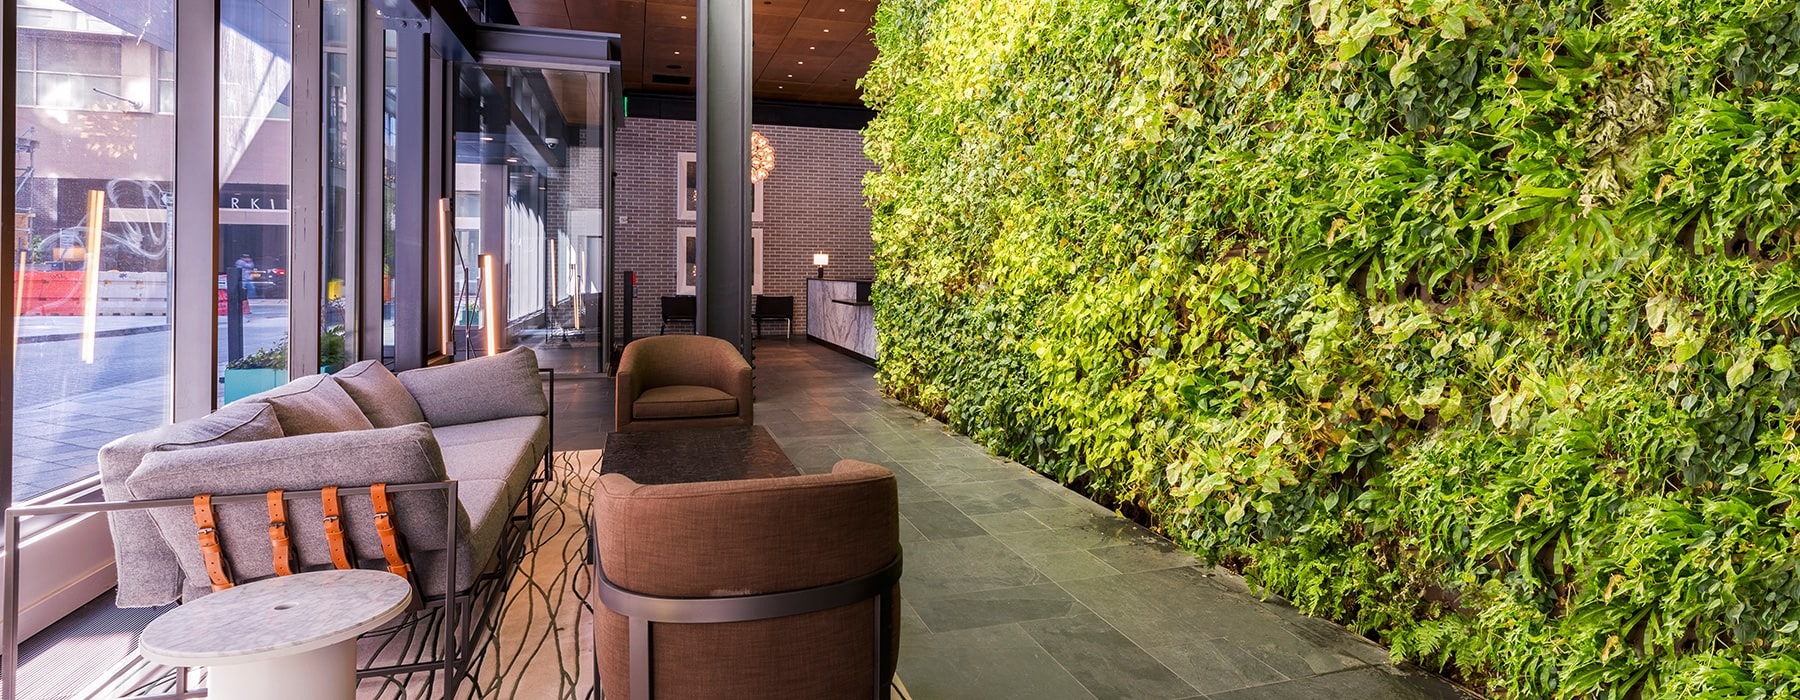 seating area beside large lush wall-turf and near lobby